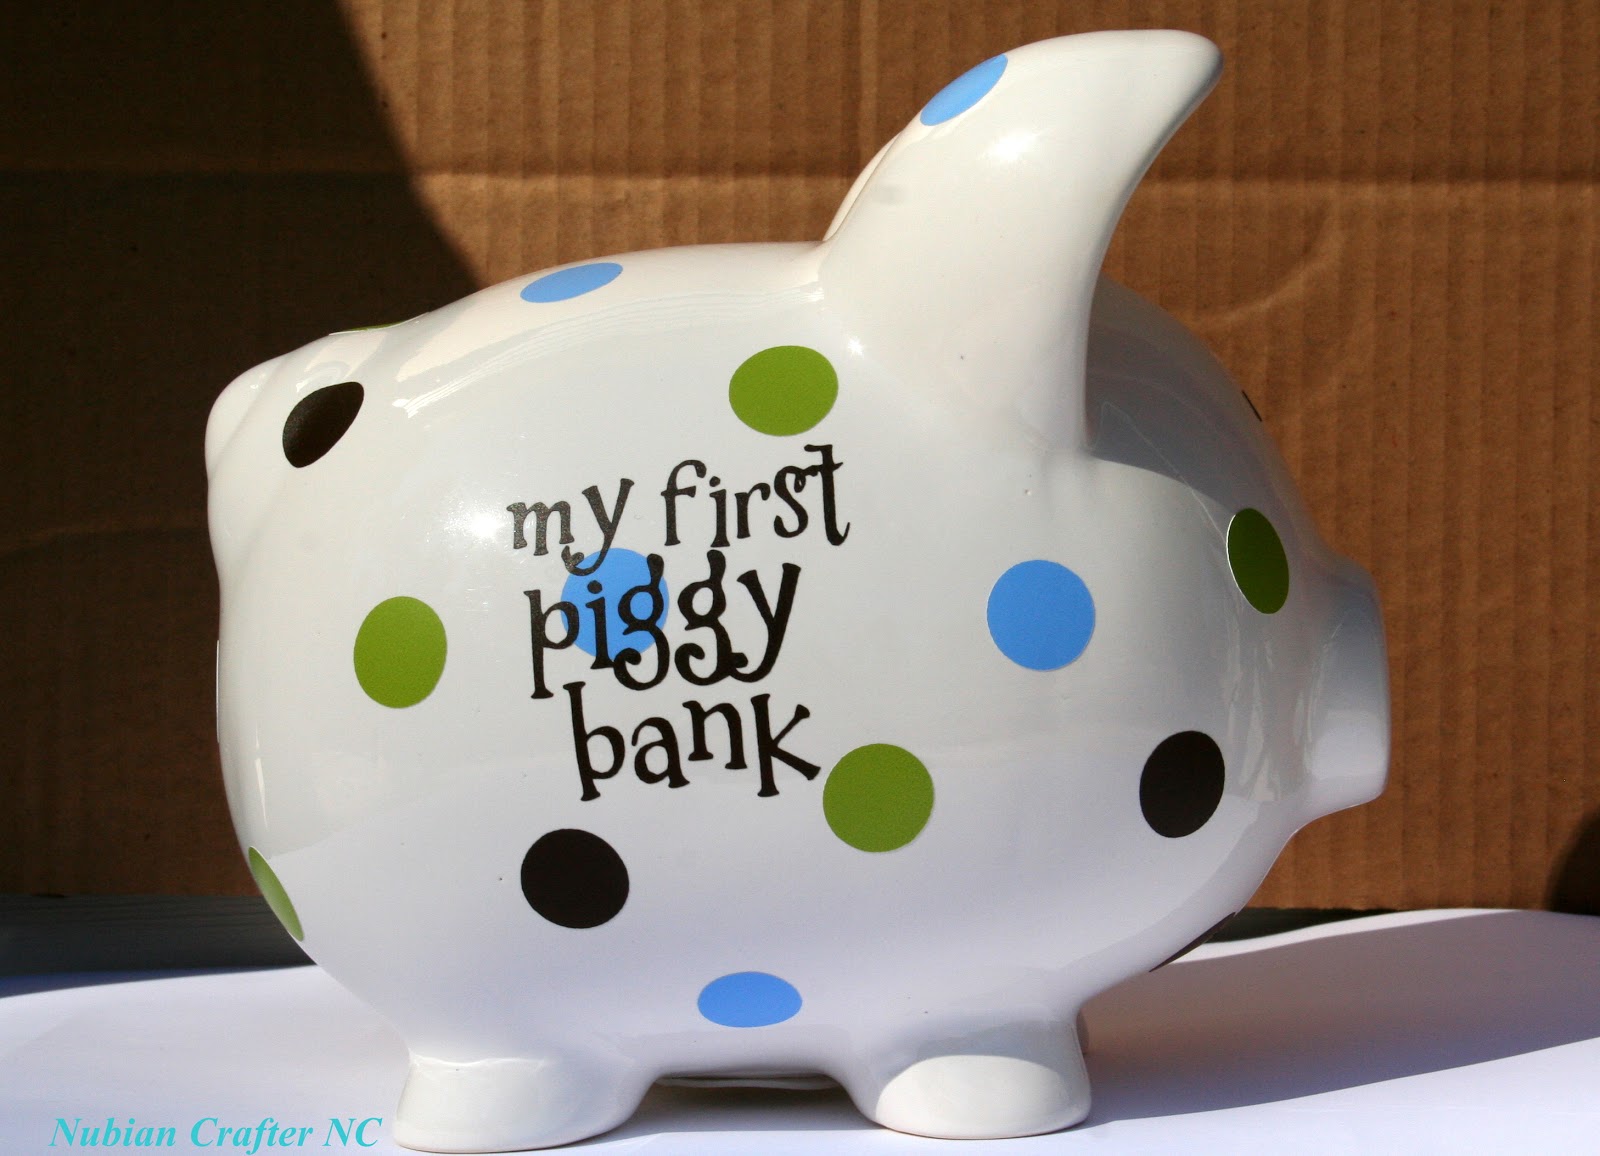 Nubian Crafter DeSigns Personalized Piggy Bank